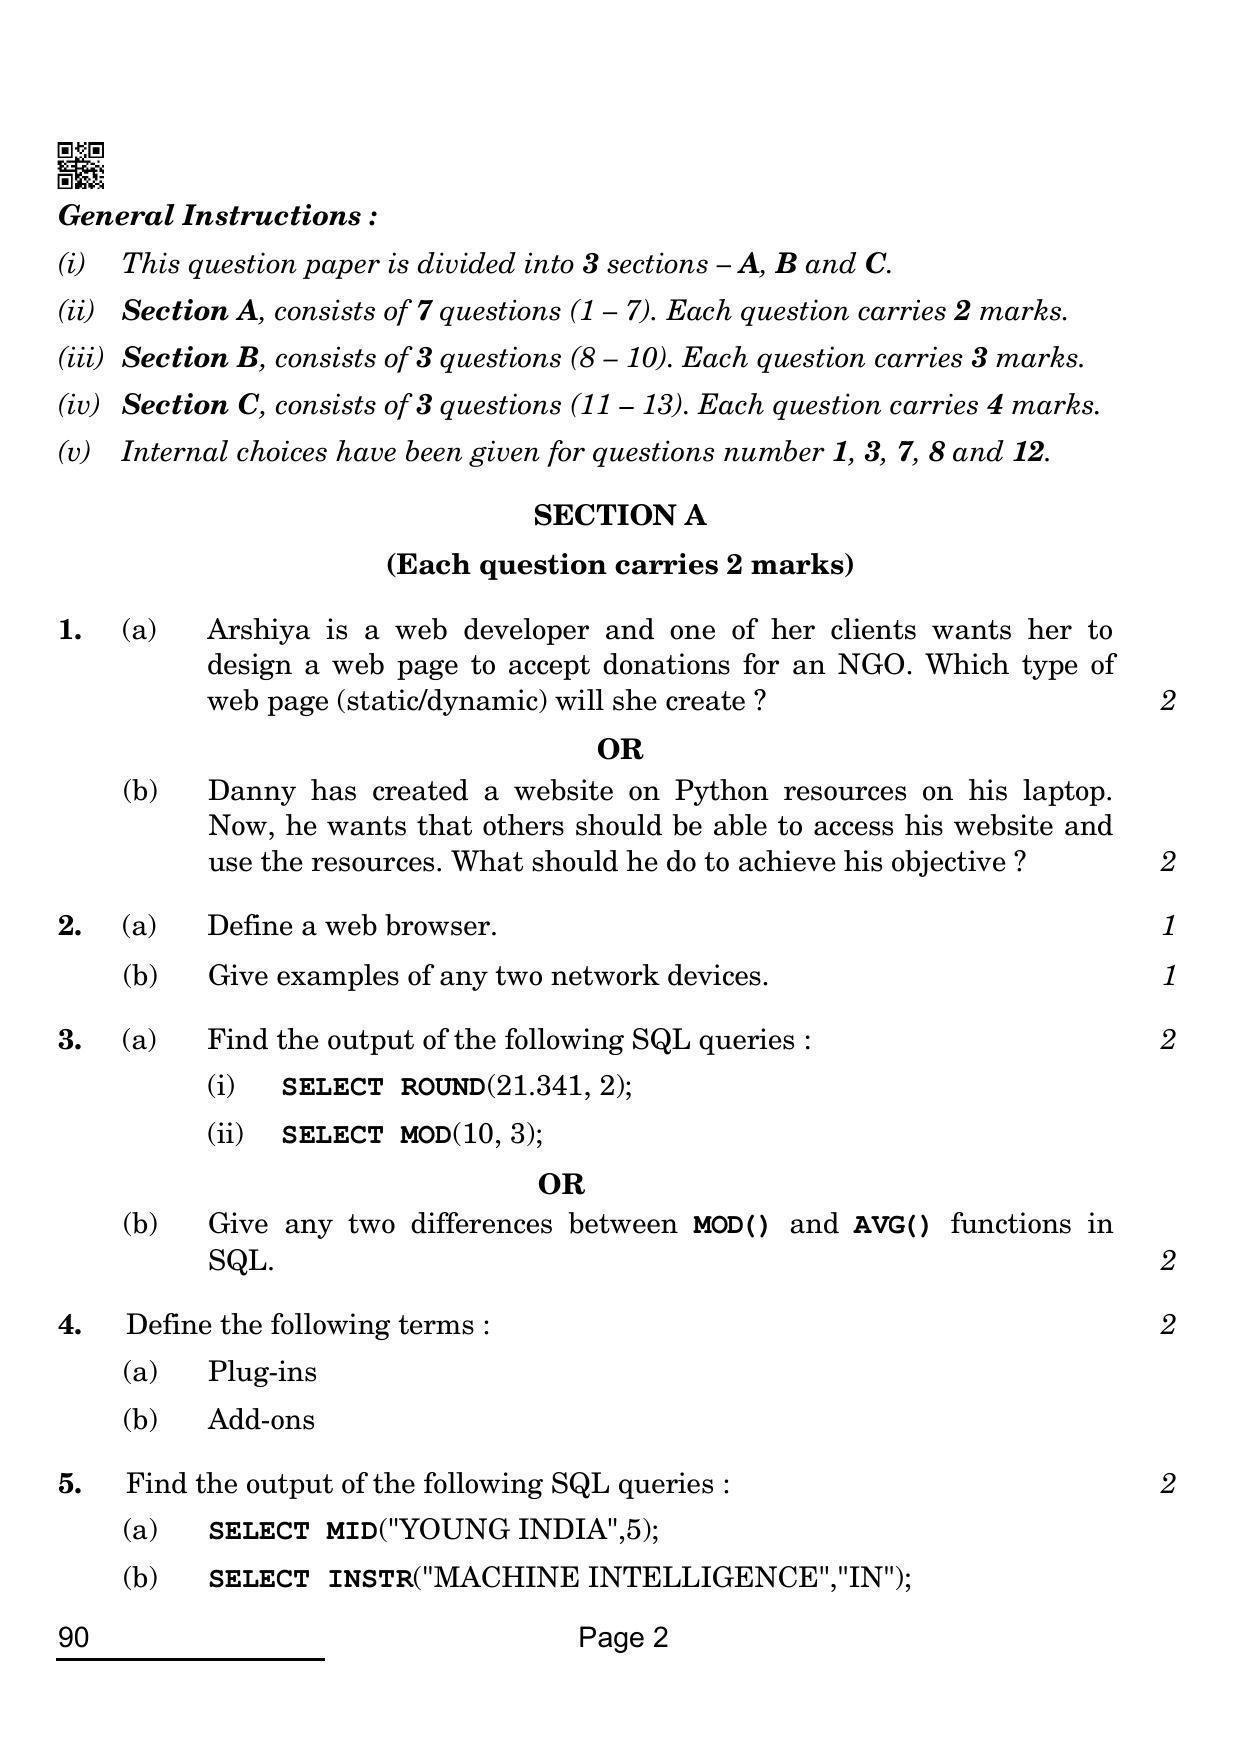 CBSE Class 12 90 INFORMATIC PRACTICES 2022 Compartment Question Paper - Page 2